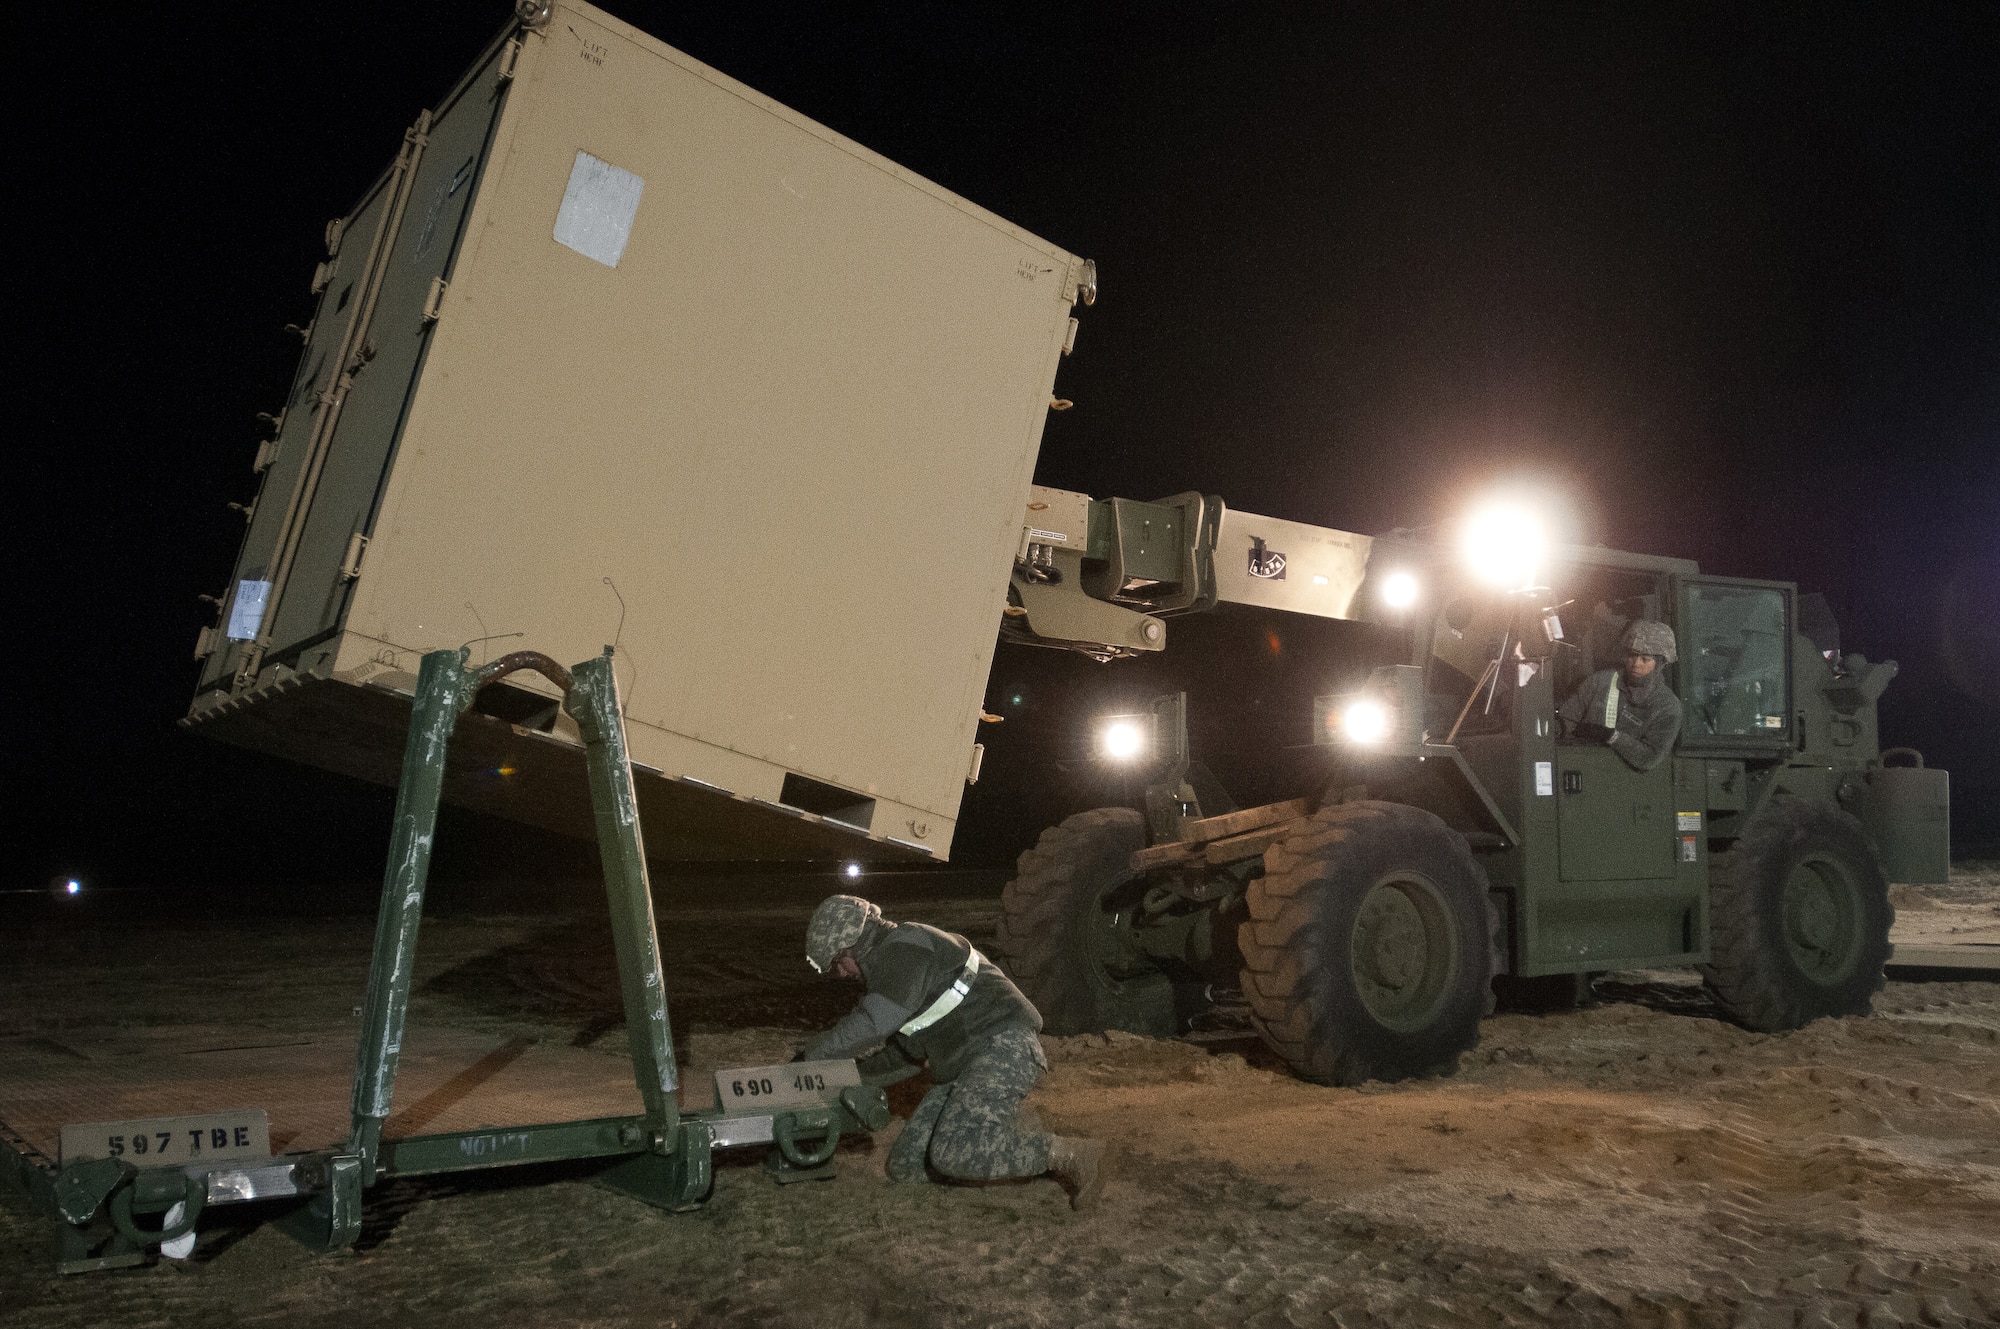 U.S. Army Specialist Amanda Alaeluci positions a cargo container using a 10,000-pound all-terrain forklift as Private 1st Class Callie Rankin prepares a truck platform to receive the container March 26, 2012, during Exercise Eagle Flag at Joint Base McGuire-Dix-Lakehurst, N.J. Both Soldiers are assigned to the 690th Rapid Port Opening Element, based at Fort Eustis, Va. The element is working with the Kentucky Air National Guard's 123rd Contingency Response Group to establish an aerial port at Lakehurst Naval Air Engineering Station within 24 hours of arrival. (U.S. Air Force photo by Maj. Dale Greer)